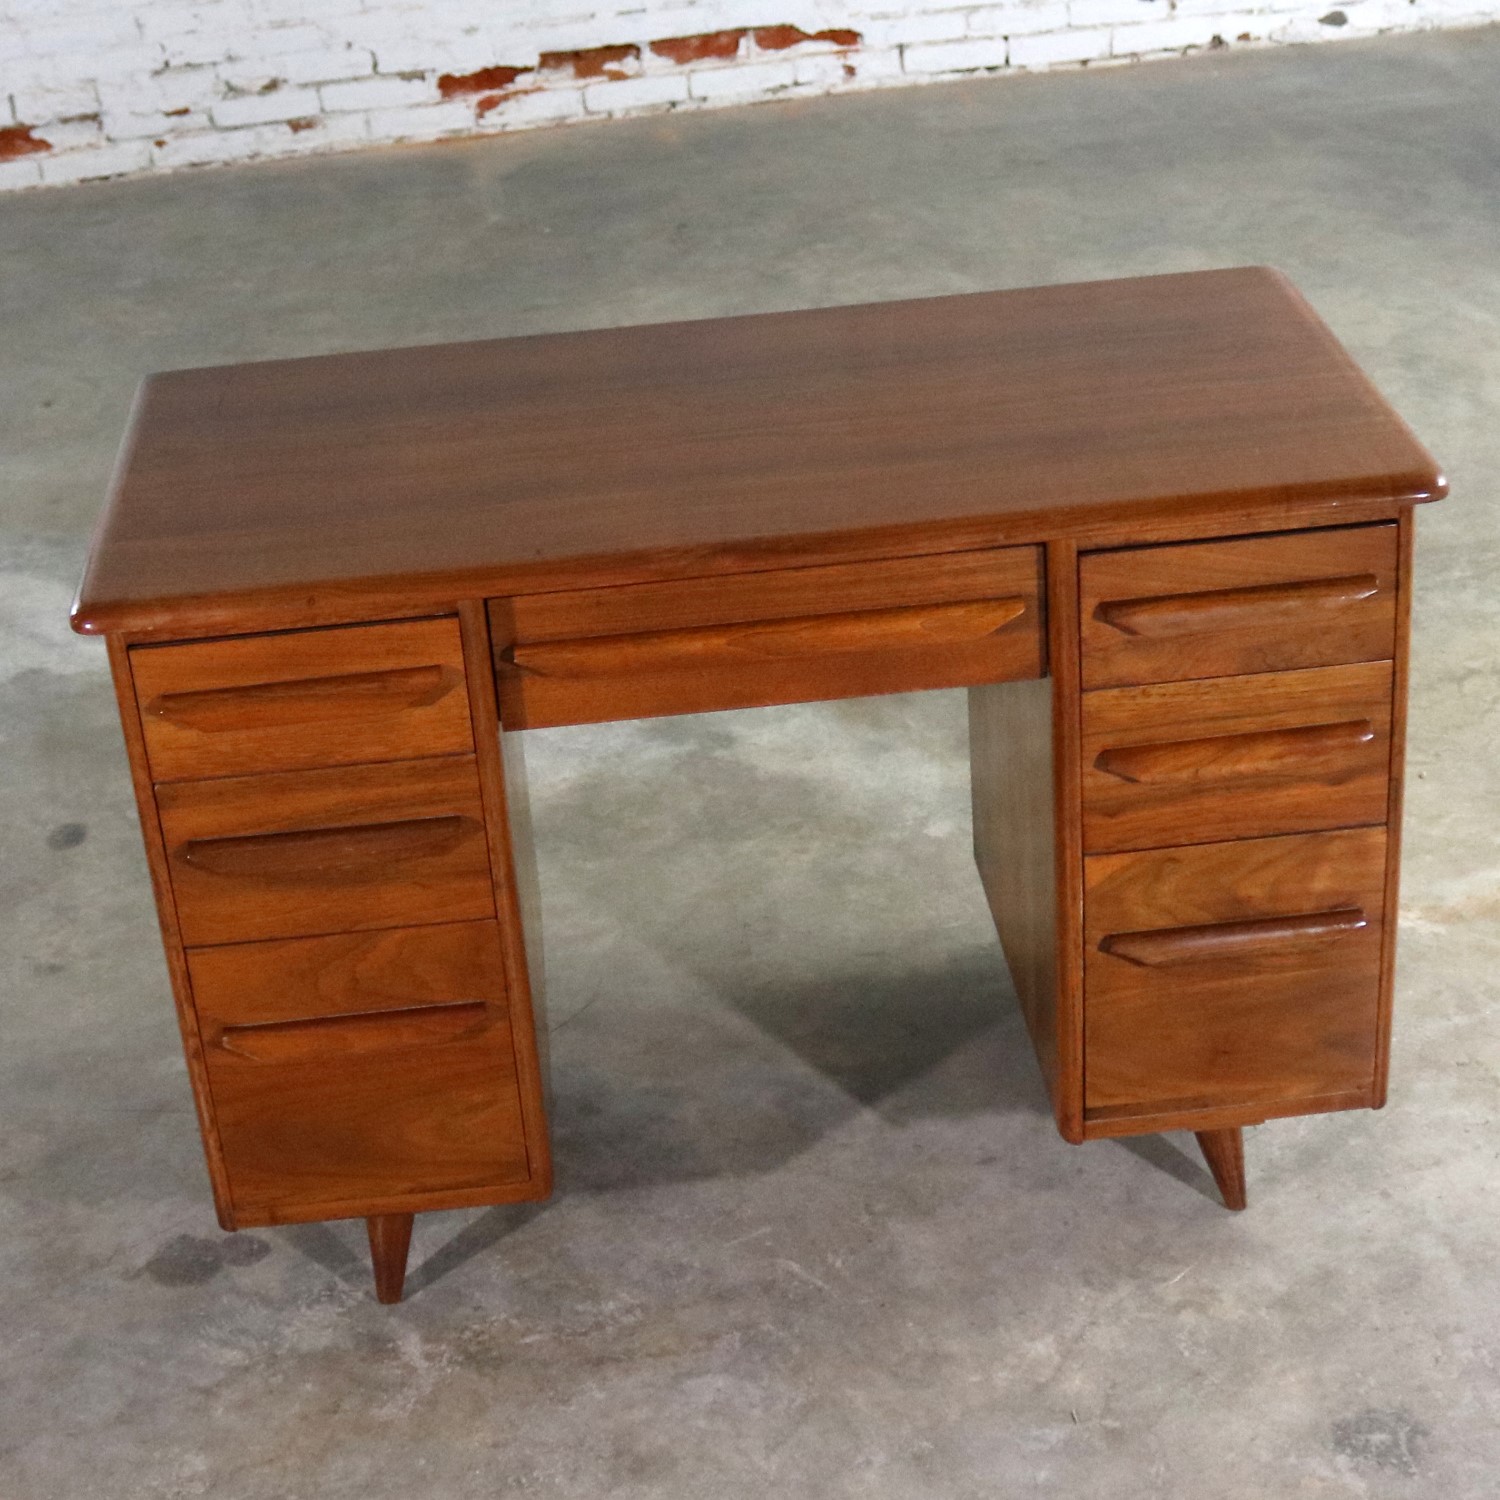 Small Walnut Writing Desk in the Manner of Carl Bissman